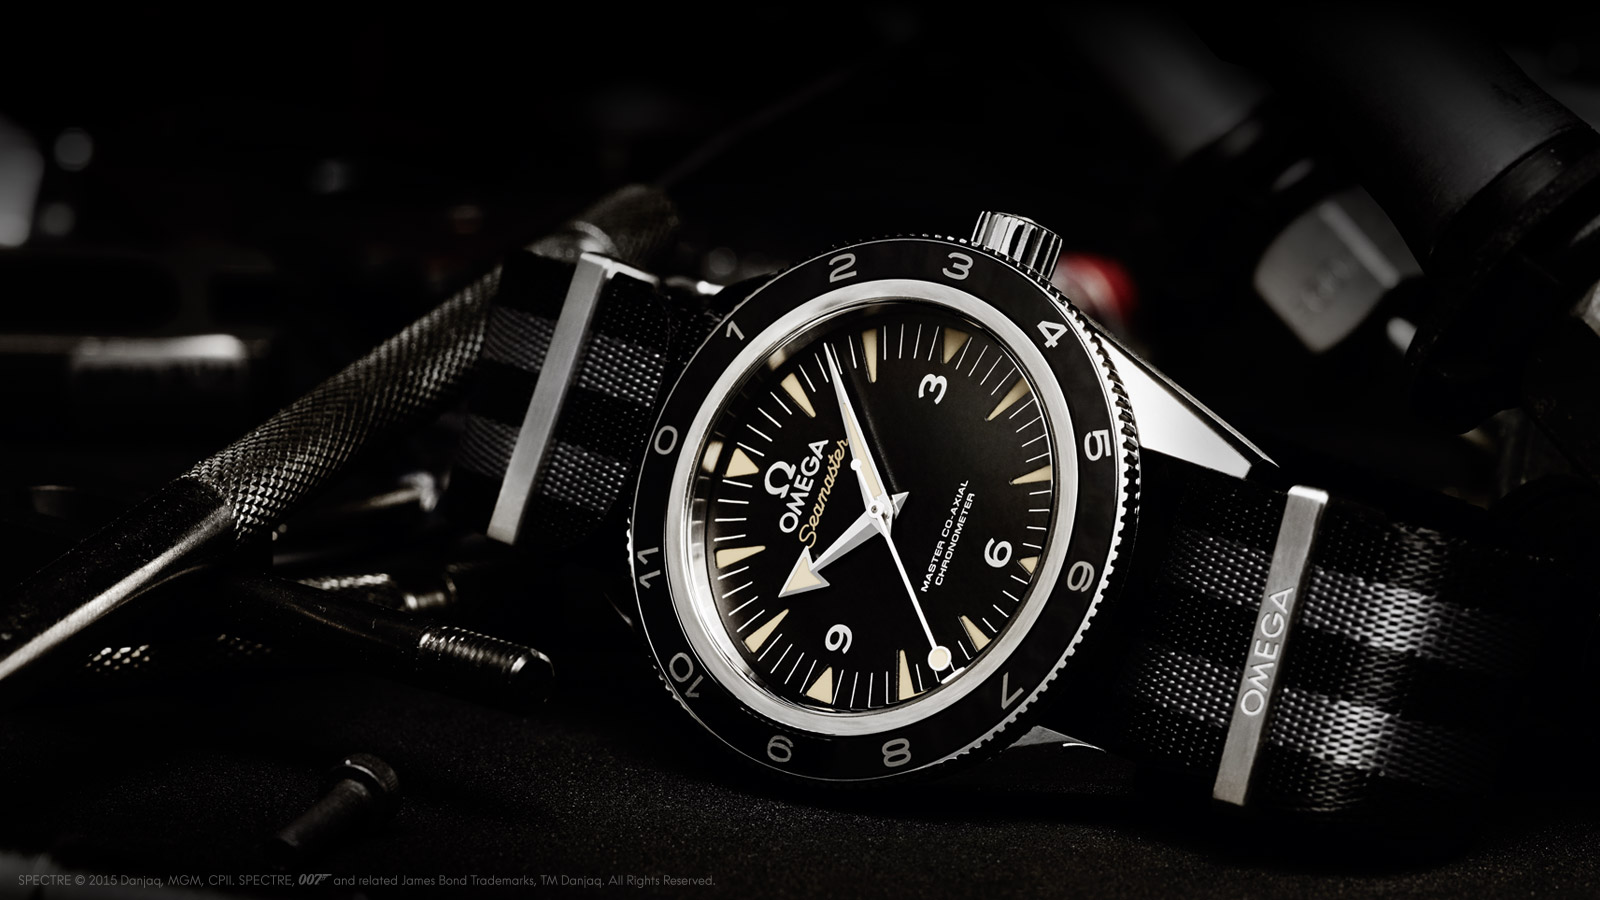 OMEGA Watches: The Seamaster 300 Spectre Limited Edition